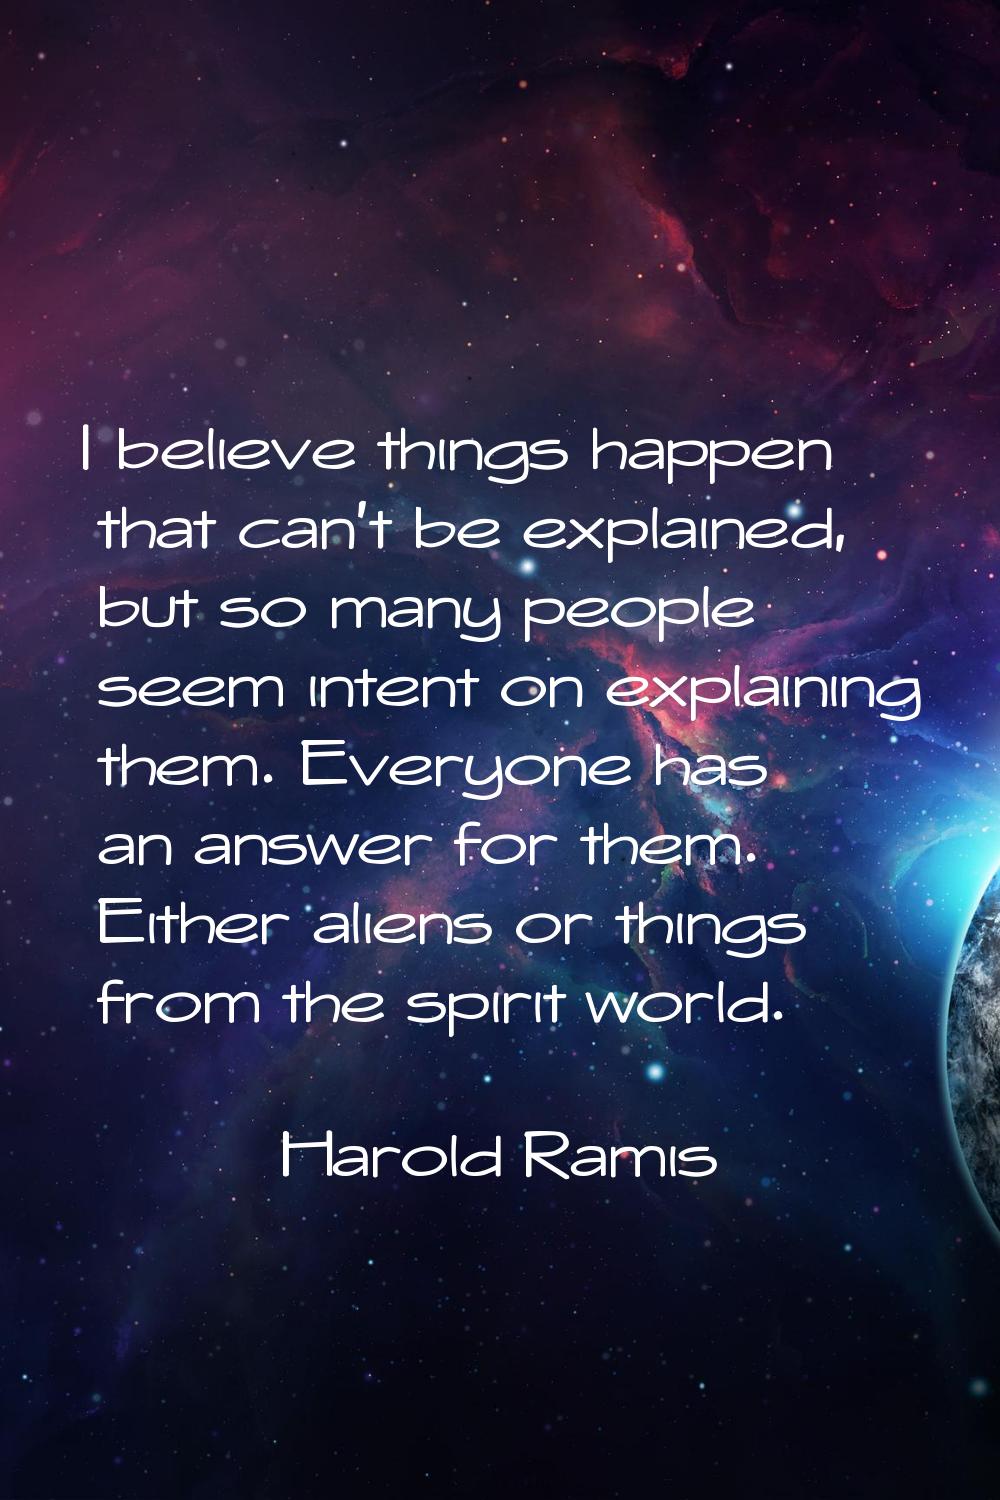 I believe things happen that can't be explained, but so many people seem intent on explaining them.